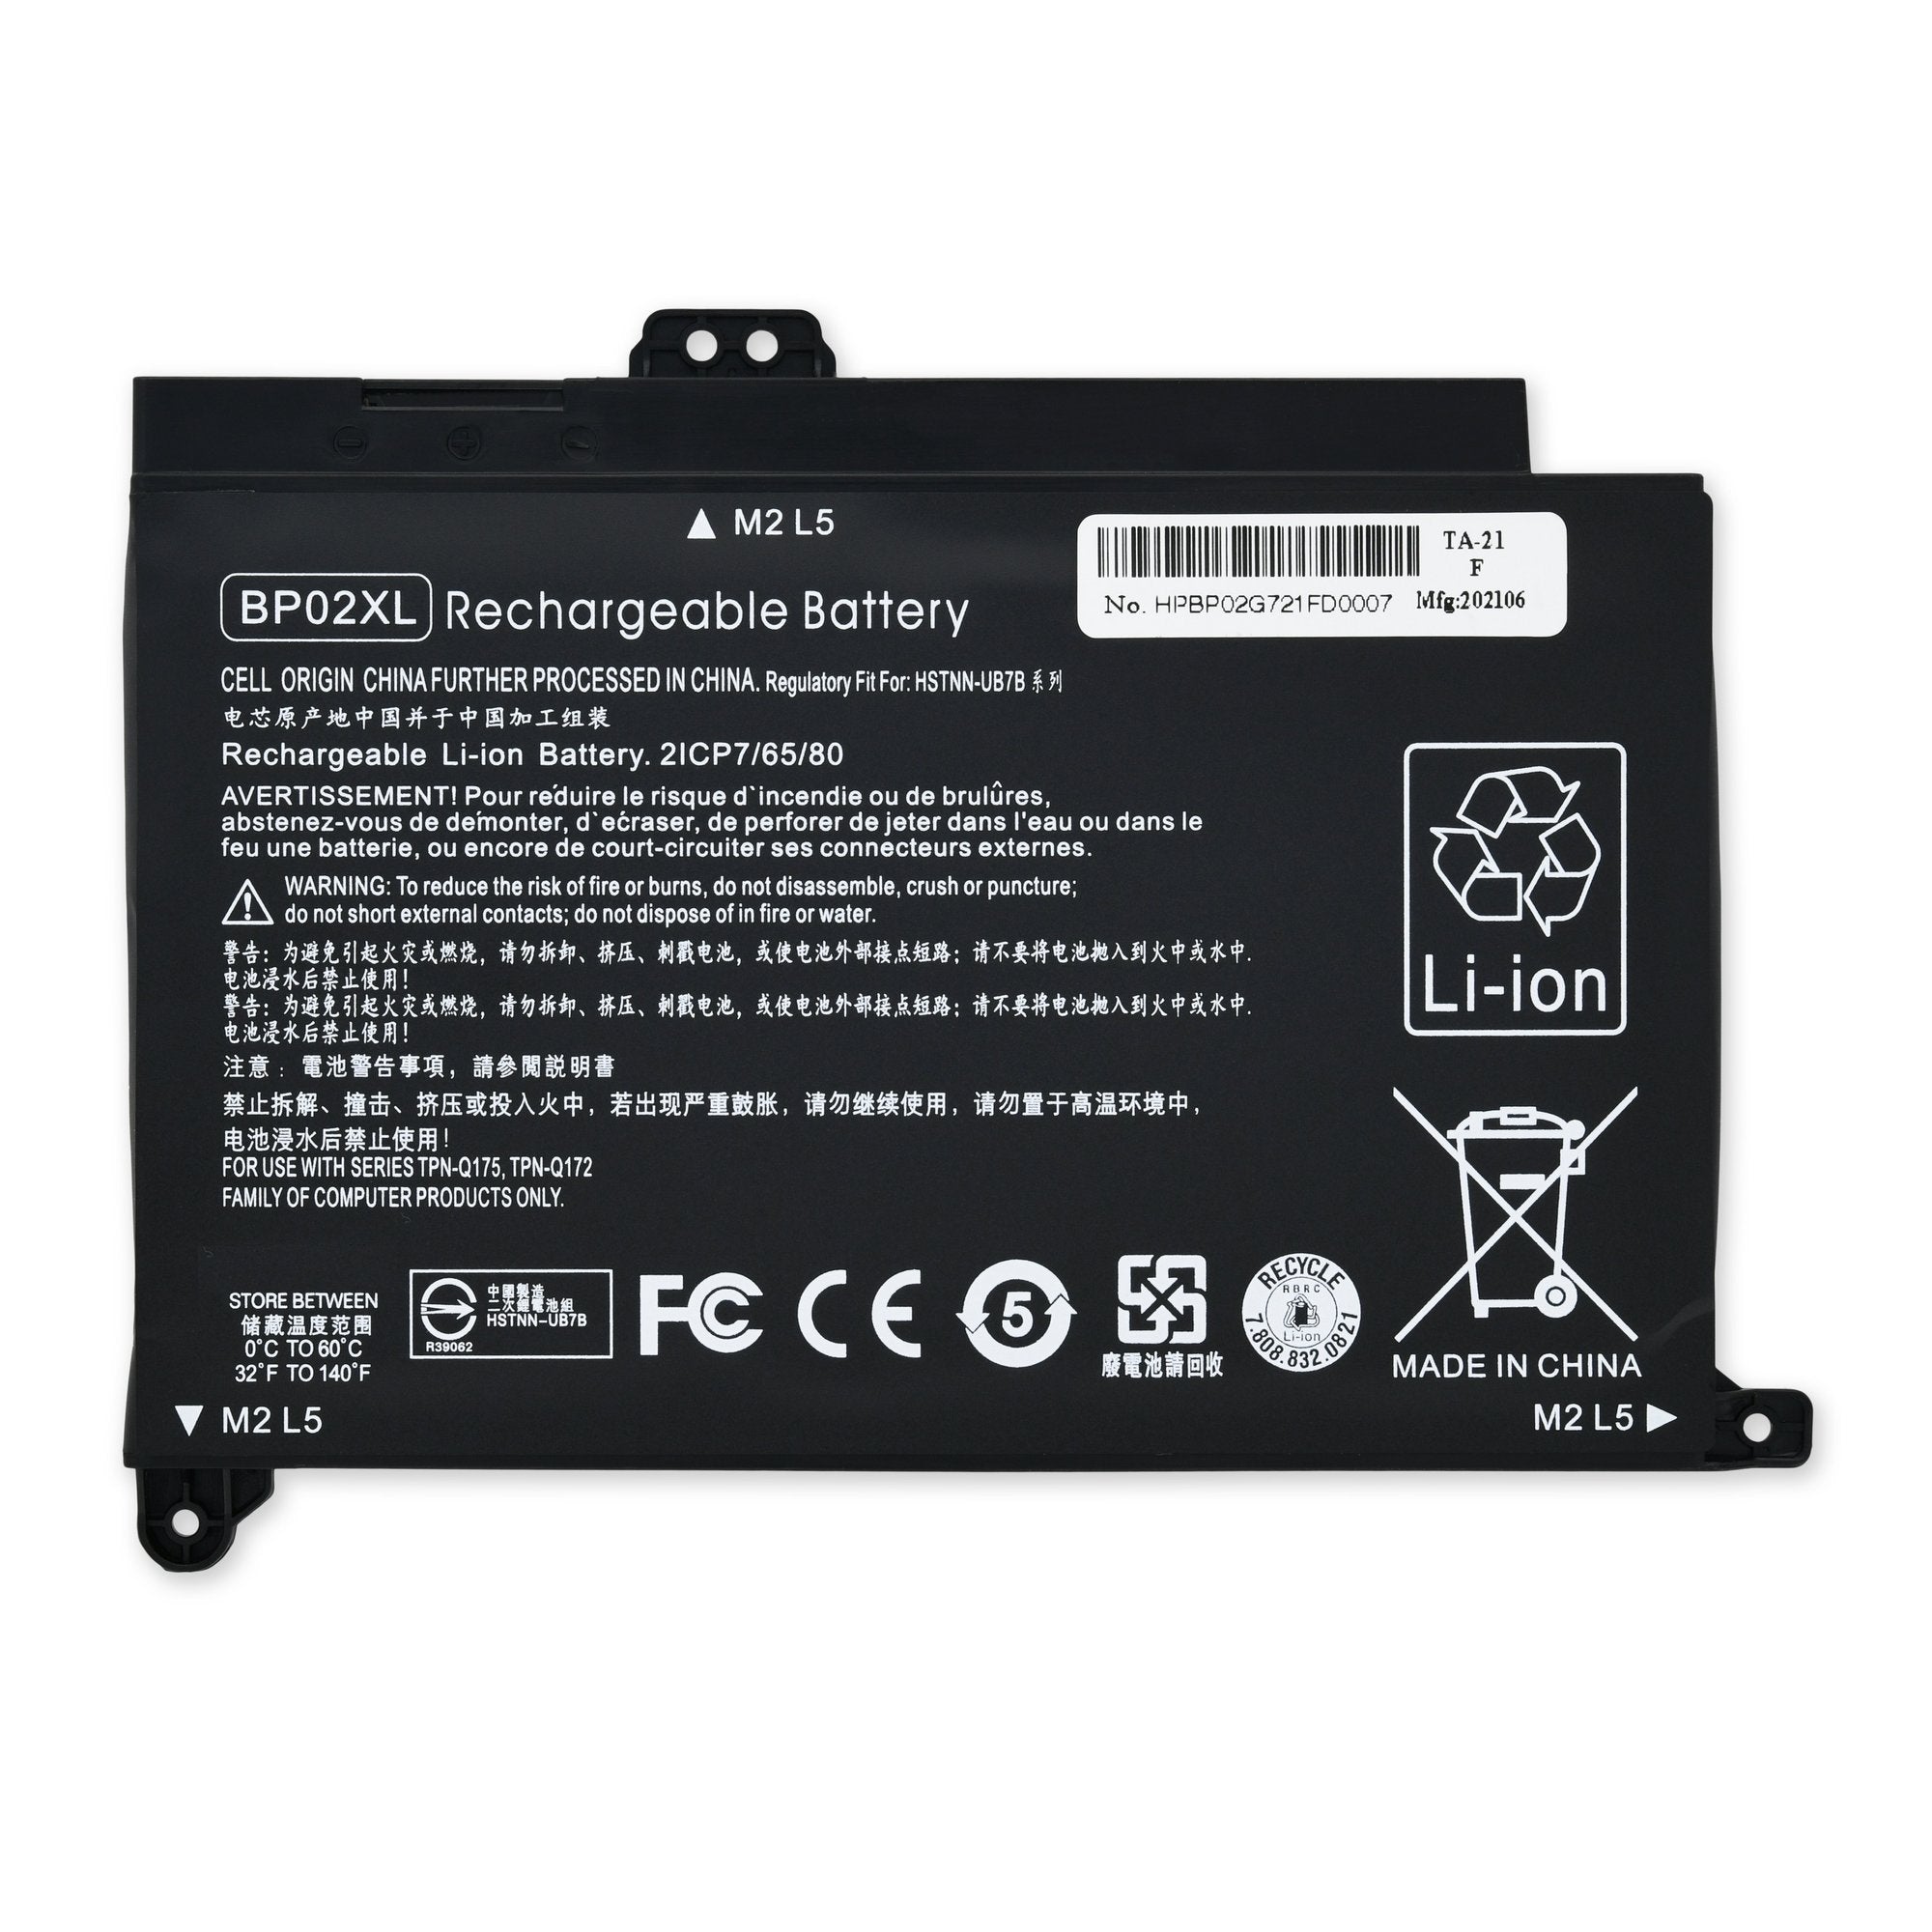 HP Pavilion BP02XL Battery New Part Only